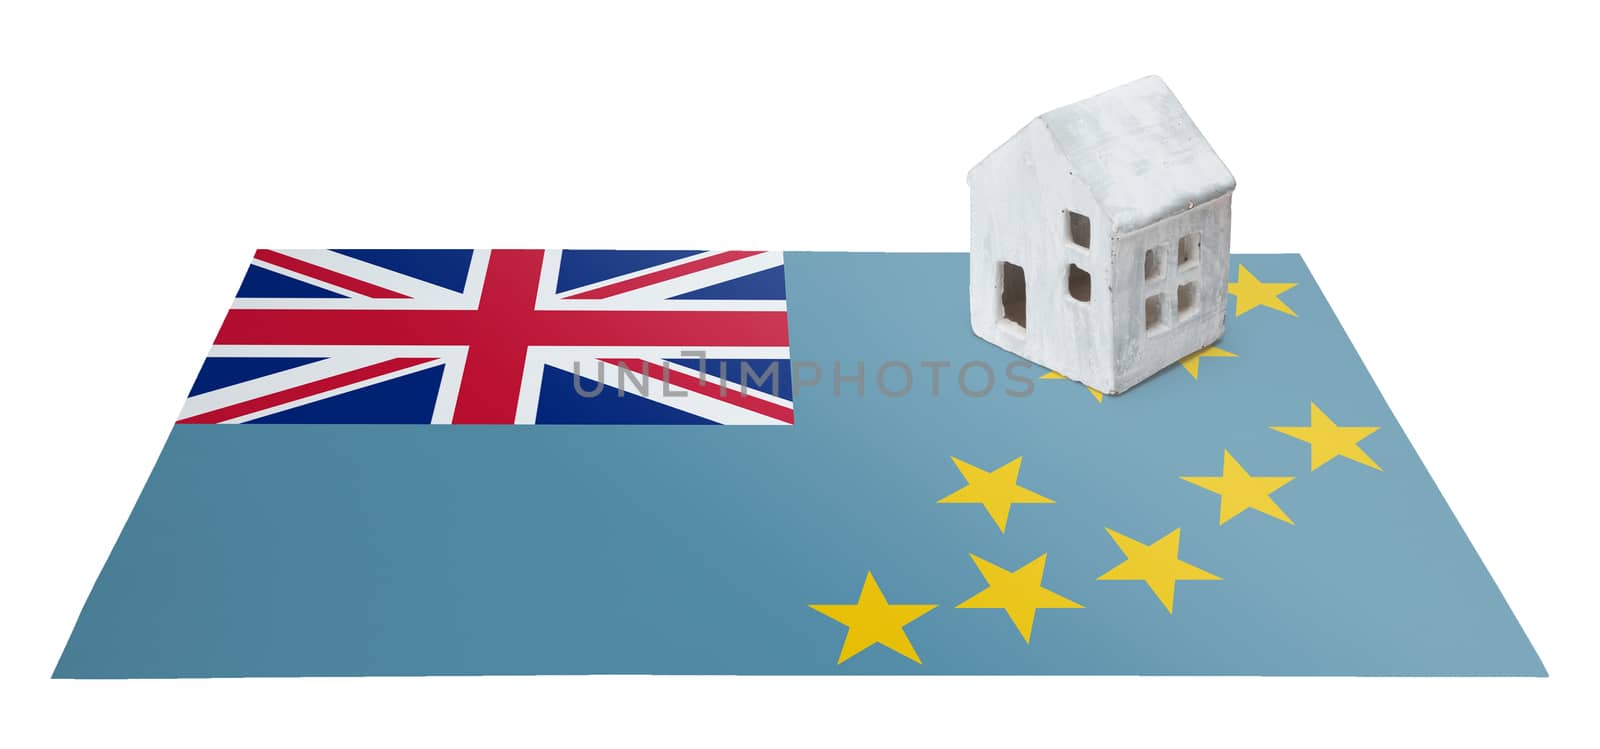 Small house on a flag - Living or migrating to Tuvalu